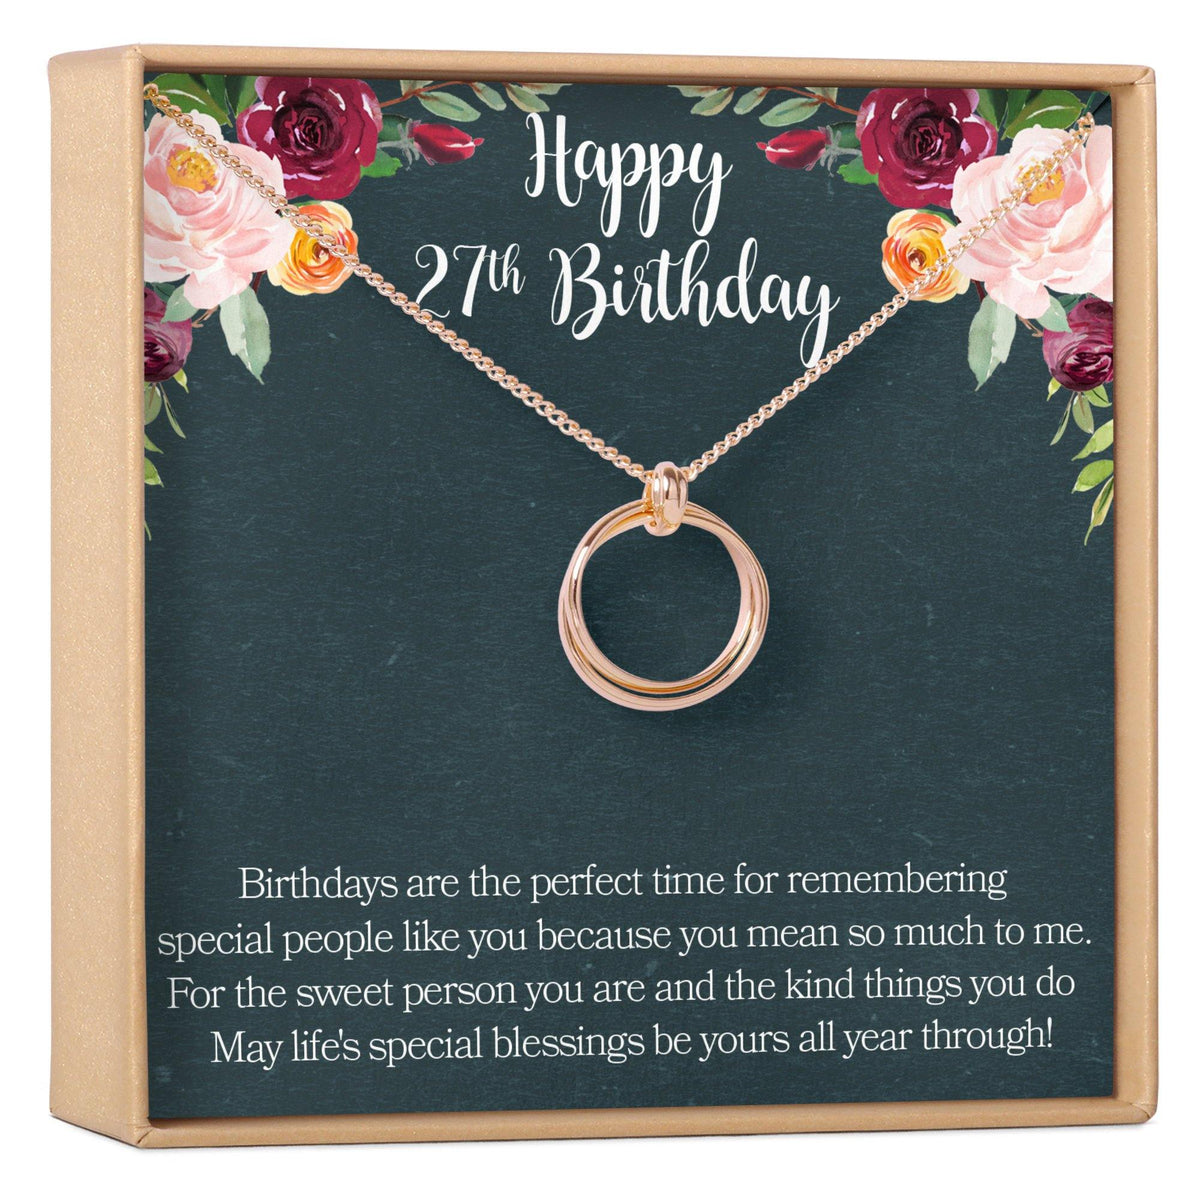 27th Birthday Necklace - Dear Ava, Jewelry / Necklaces / Pendants